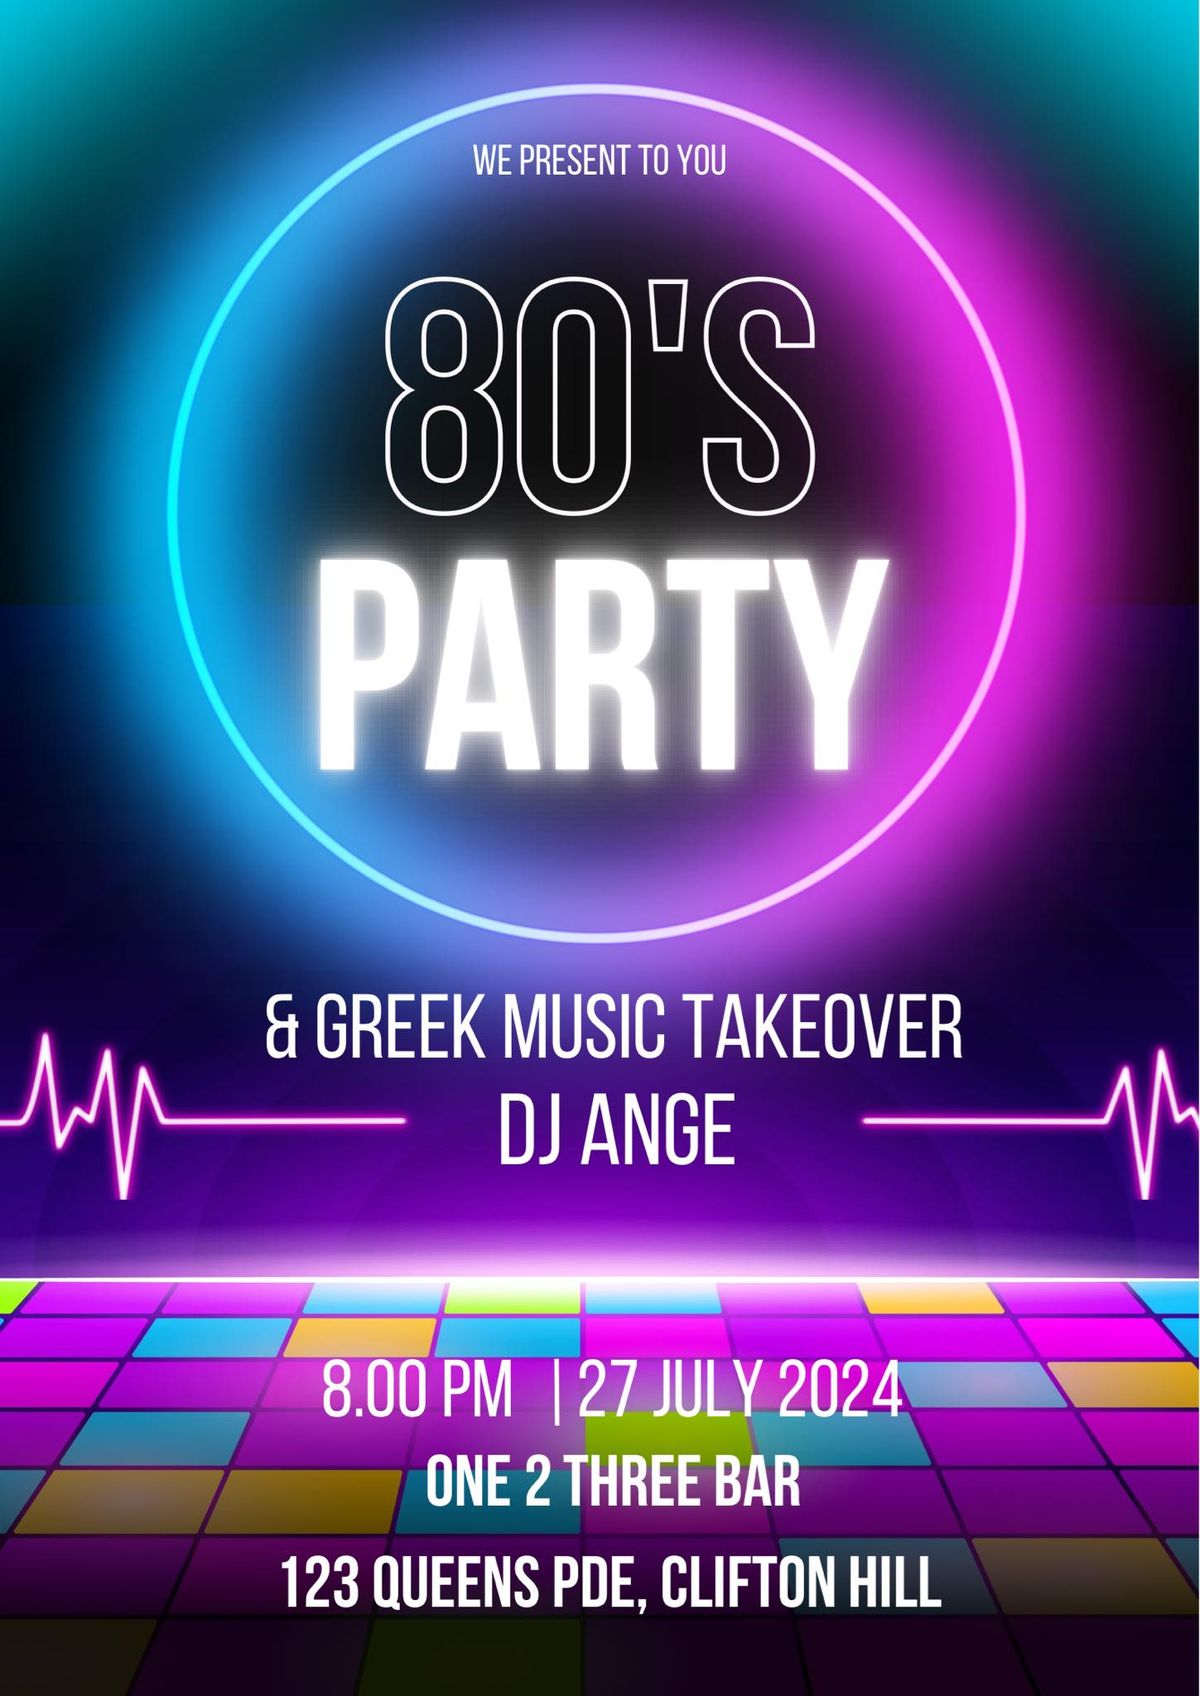 80's PARTY. GREEK MUSIC TAKEOVER WITH DJ ANGE